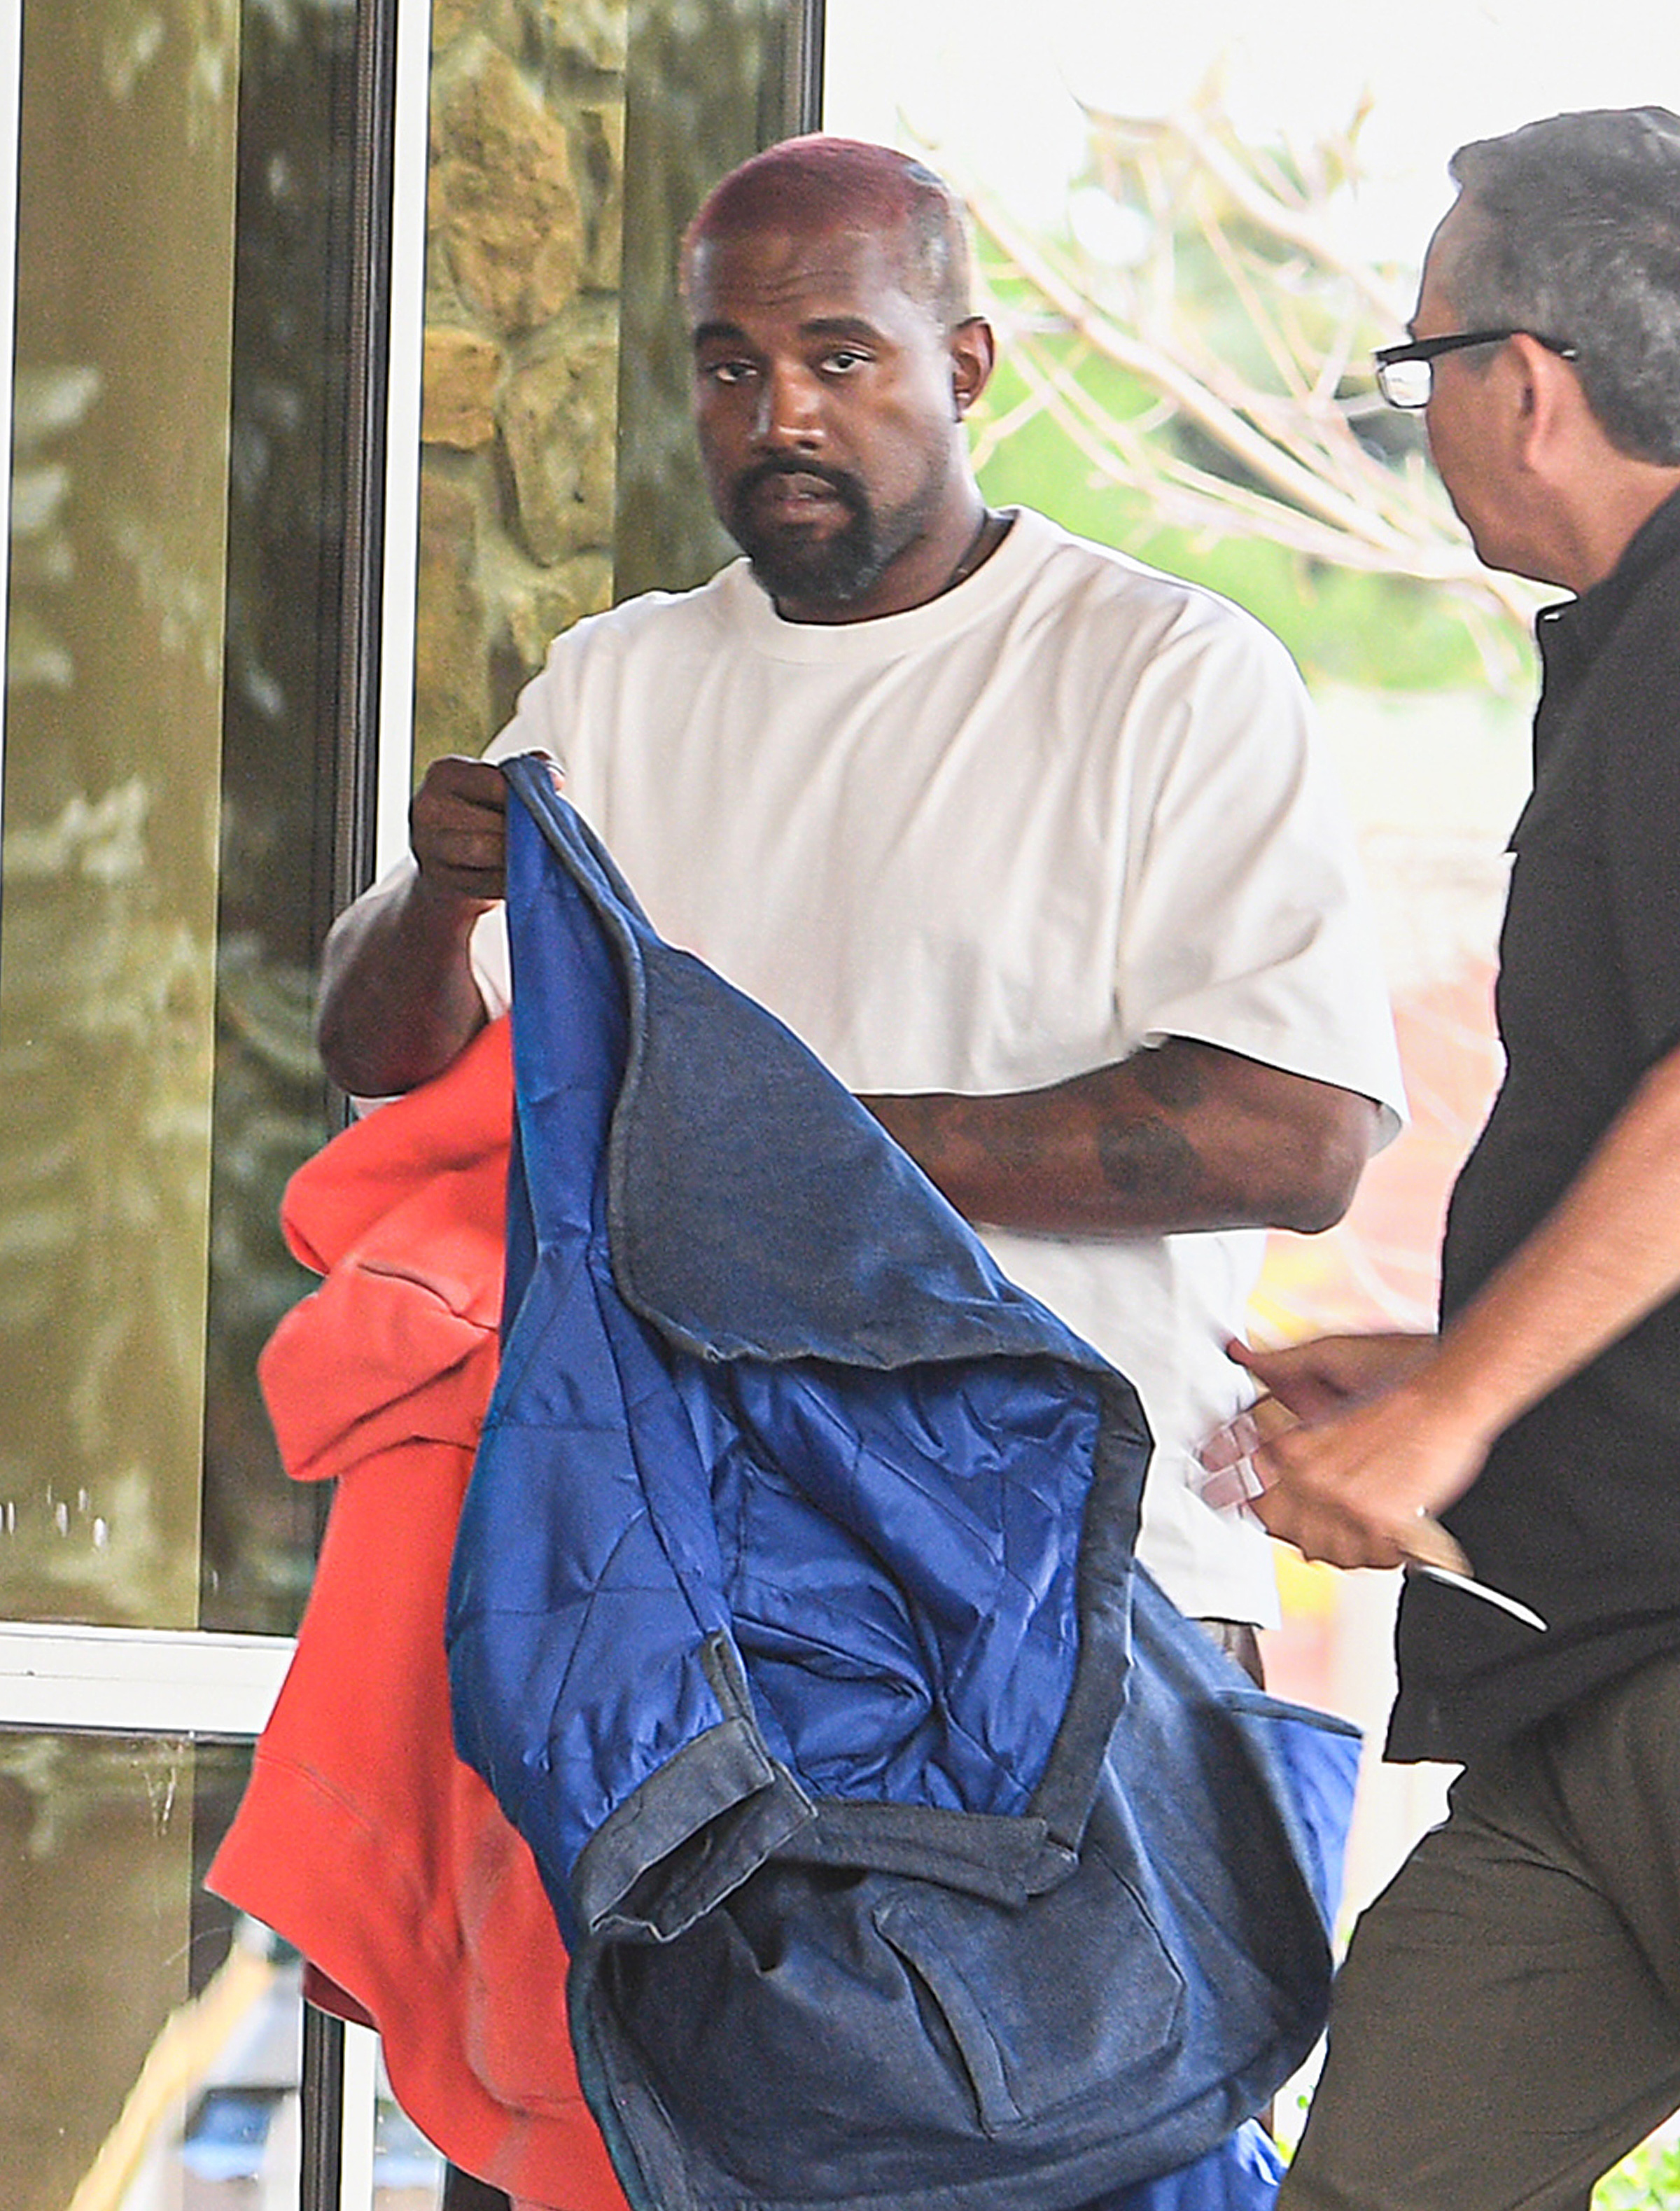 Kanye West leaves hospital, more than a week after encounter with  authorities - The San Diego Union-Tribune